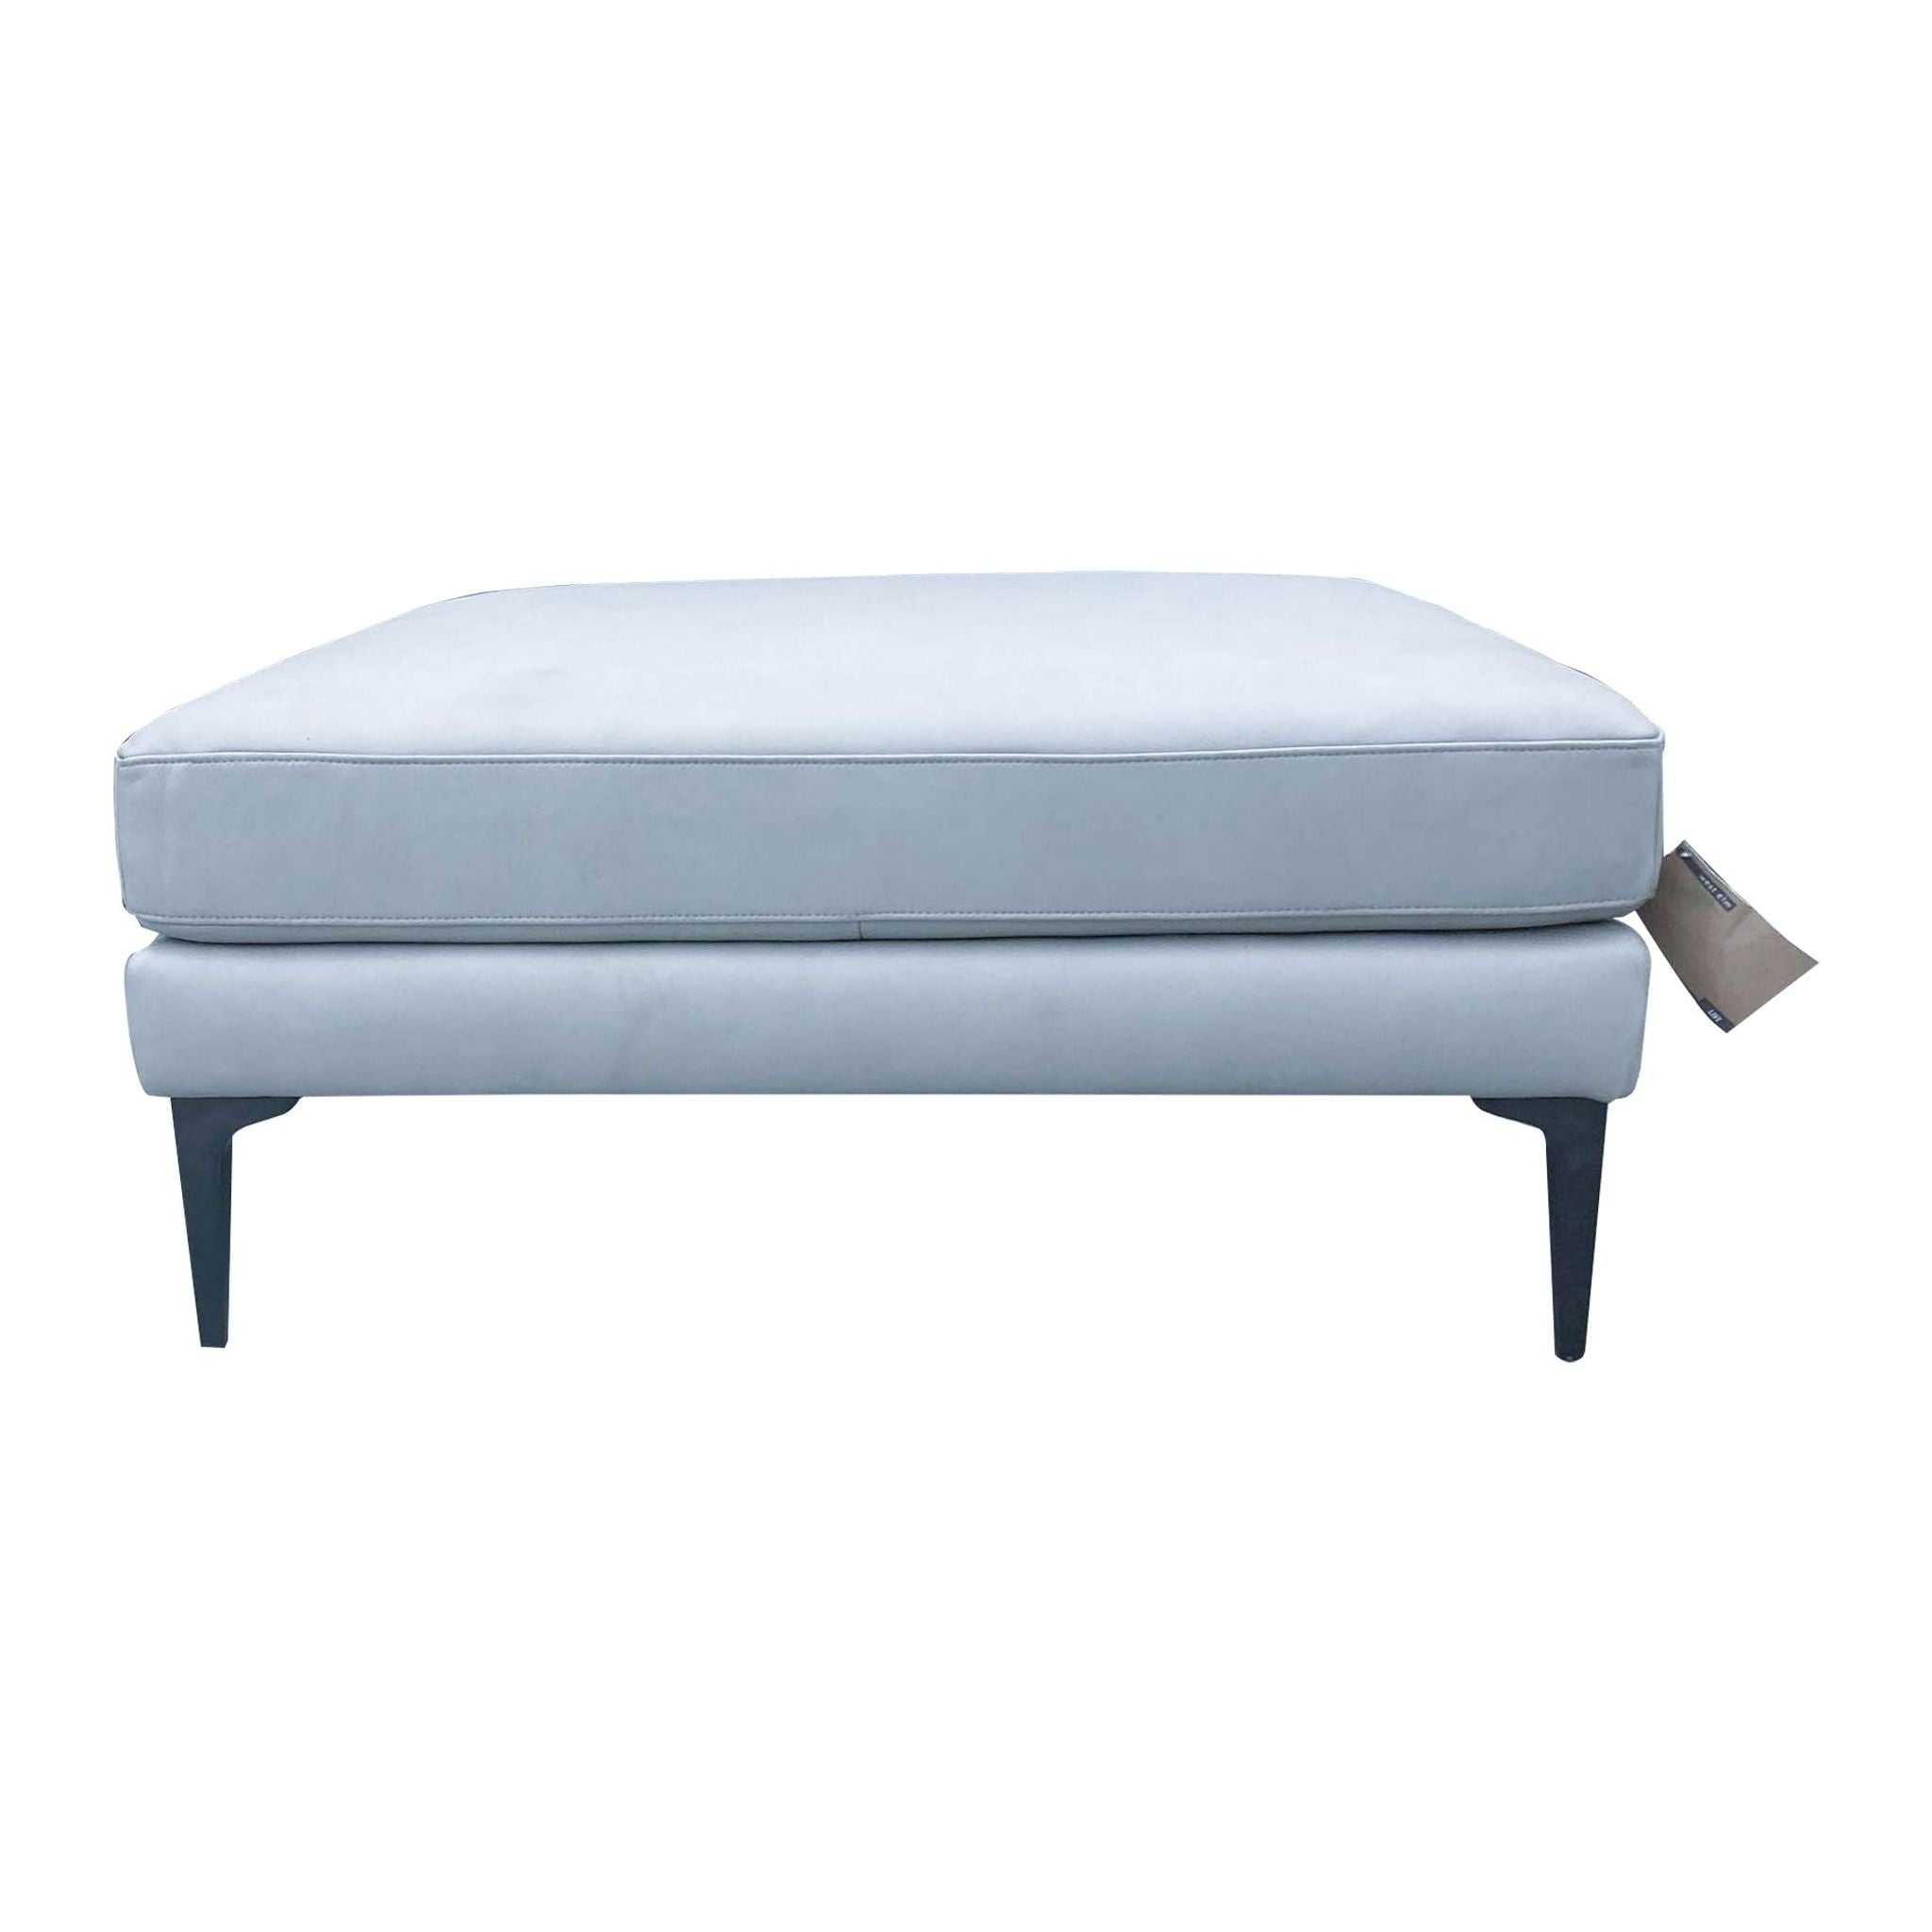 1. Grey square ottoman or coffee table by West Elm with cushioned top and angled metal legs.